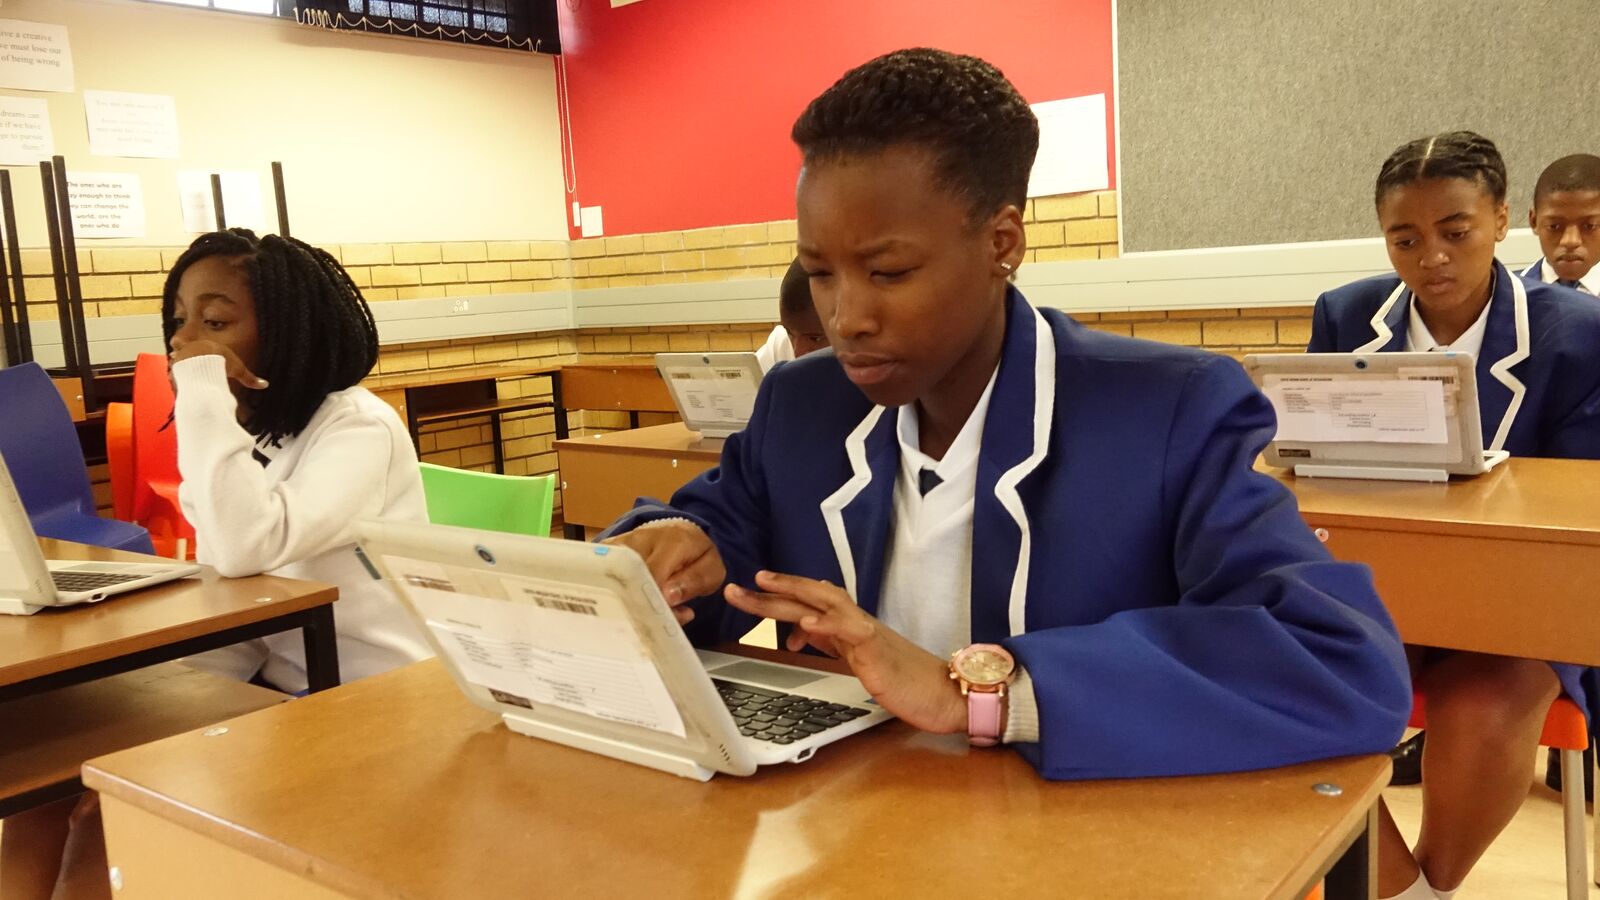 A South African student uses a computer in her class to work on math